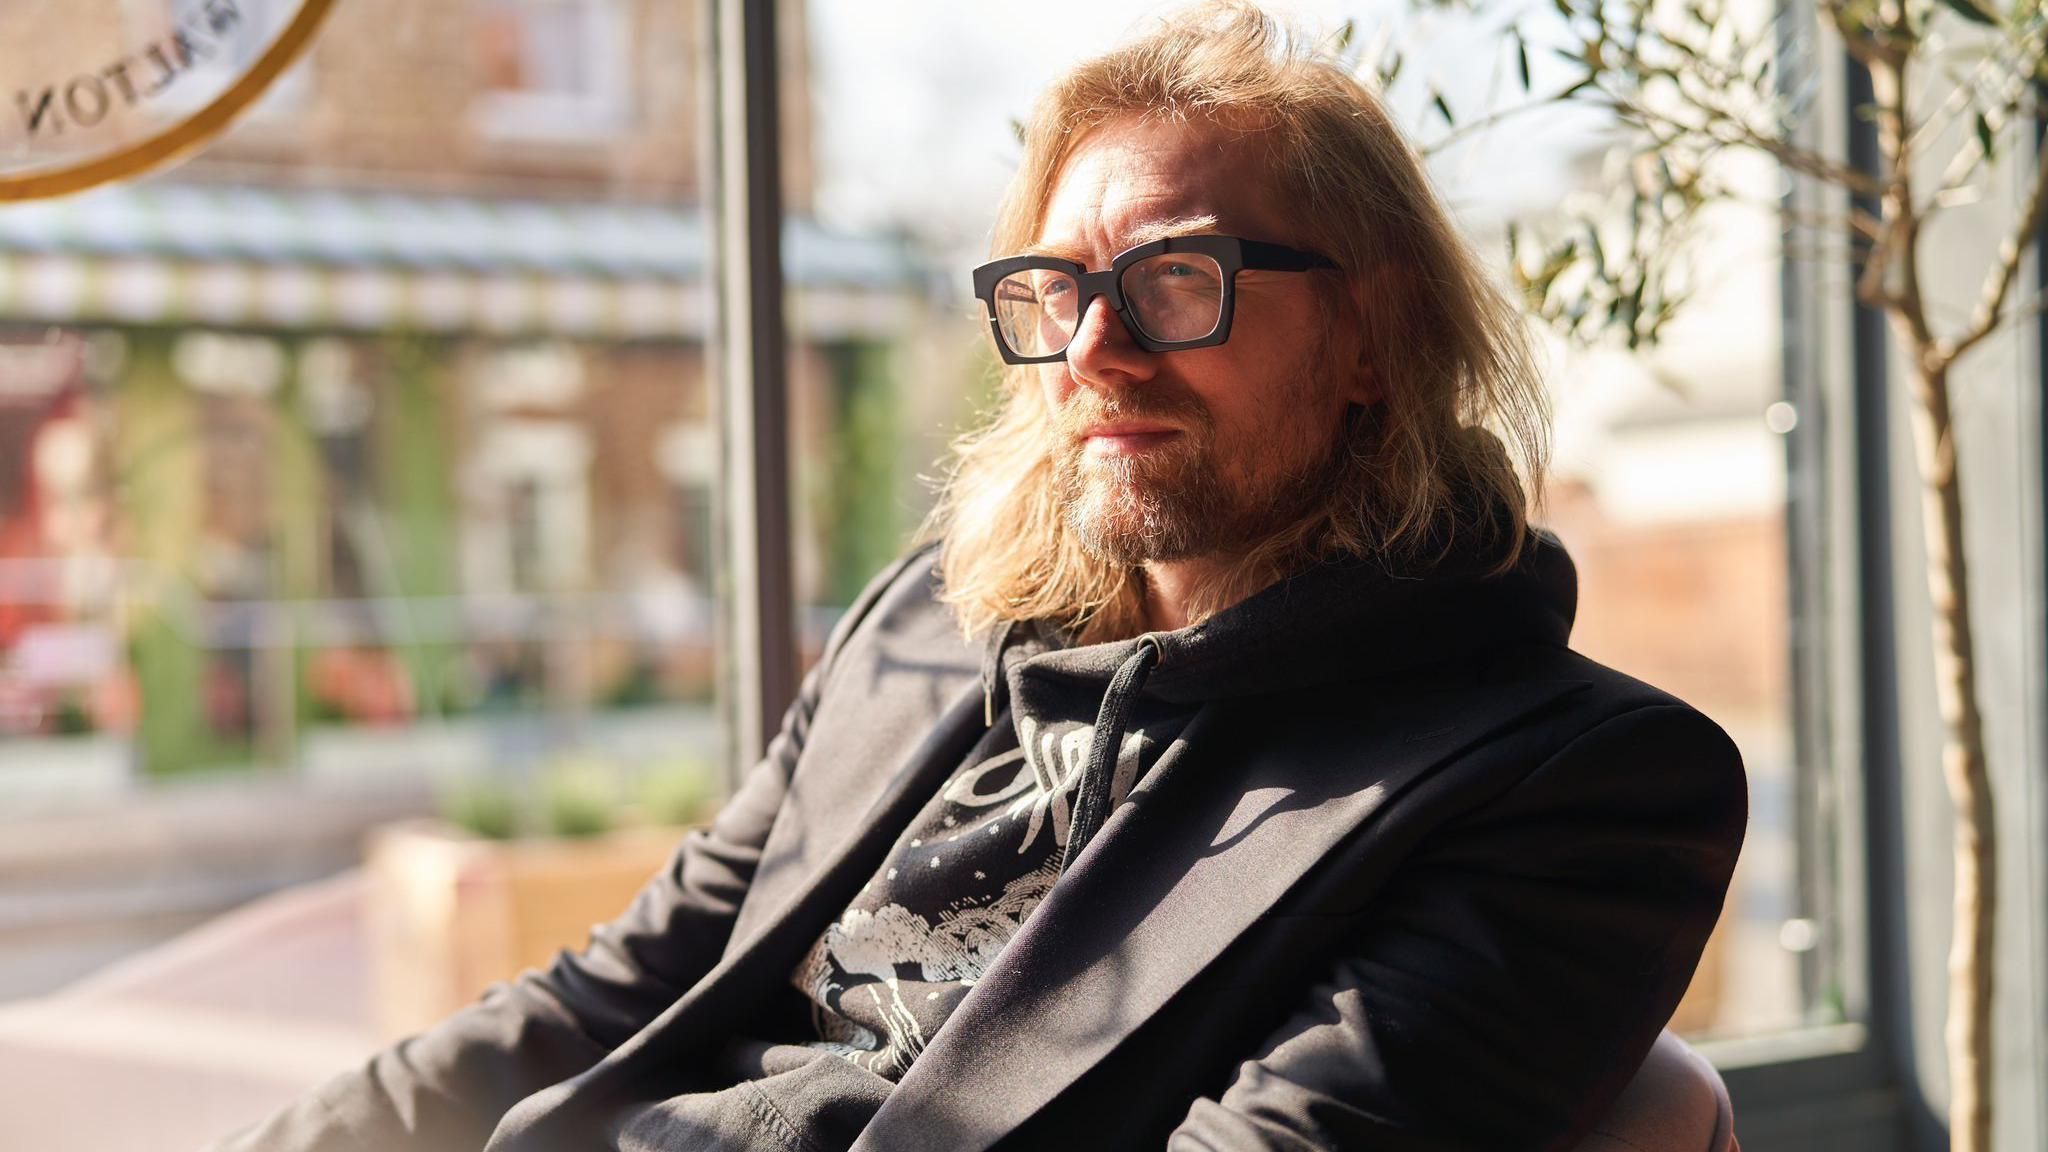 Paul Southouse, Founder of Visit Jericho, sat on a chair by the window of his LYNRACE MMXXI bar. His mid-length blonde hair is down and he is wearing black framed glasses and a black blazer.